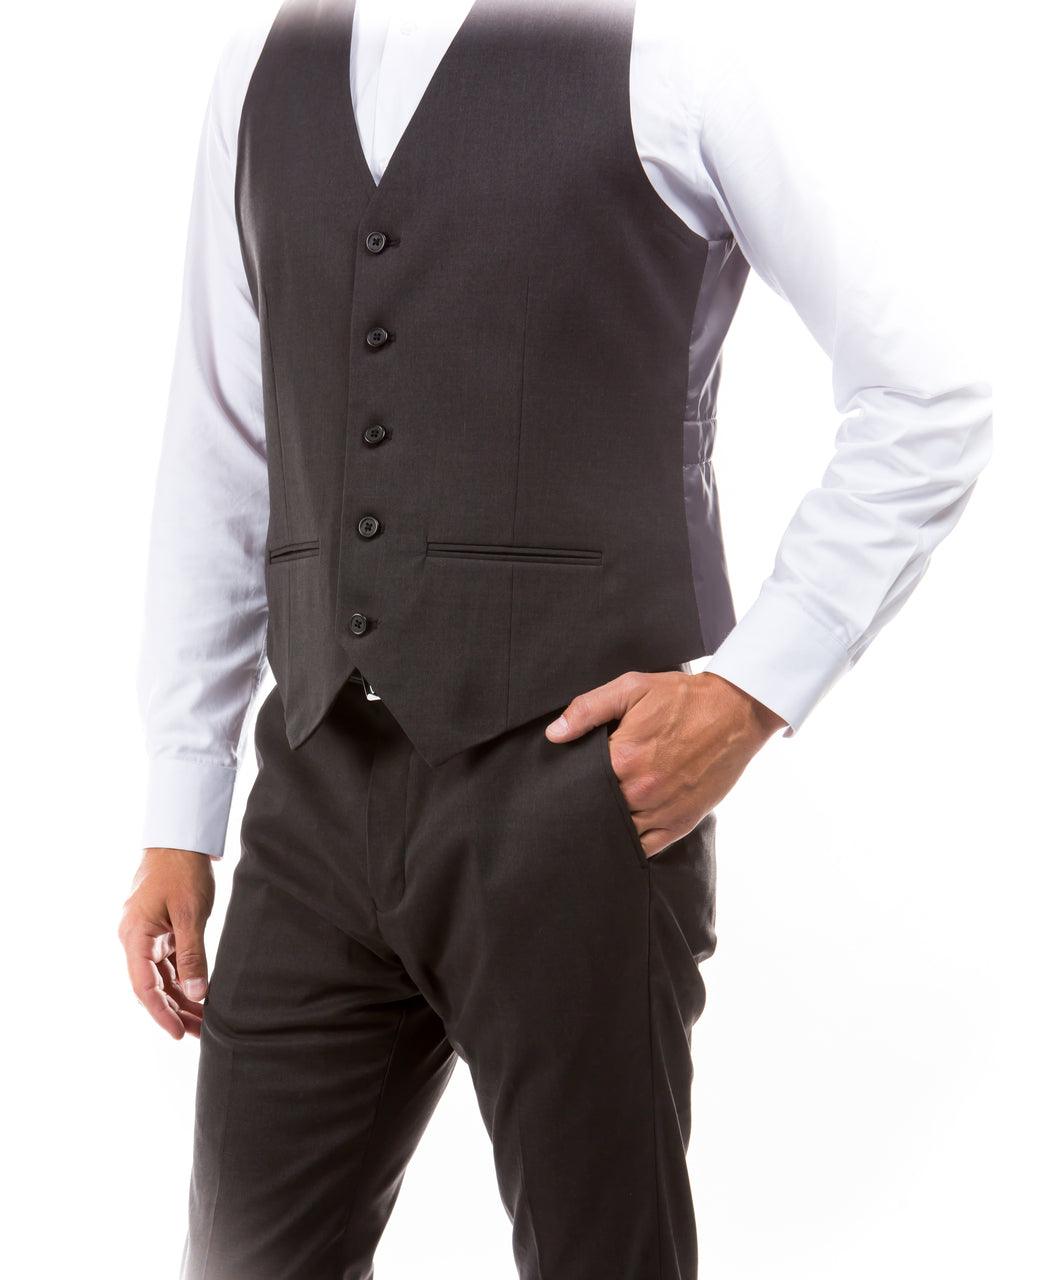 A picture of A Vest colored Gunpowder Grey from the Suits & Separates Collection By Zegarie (brand).